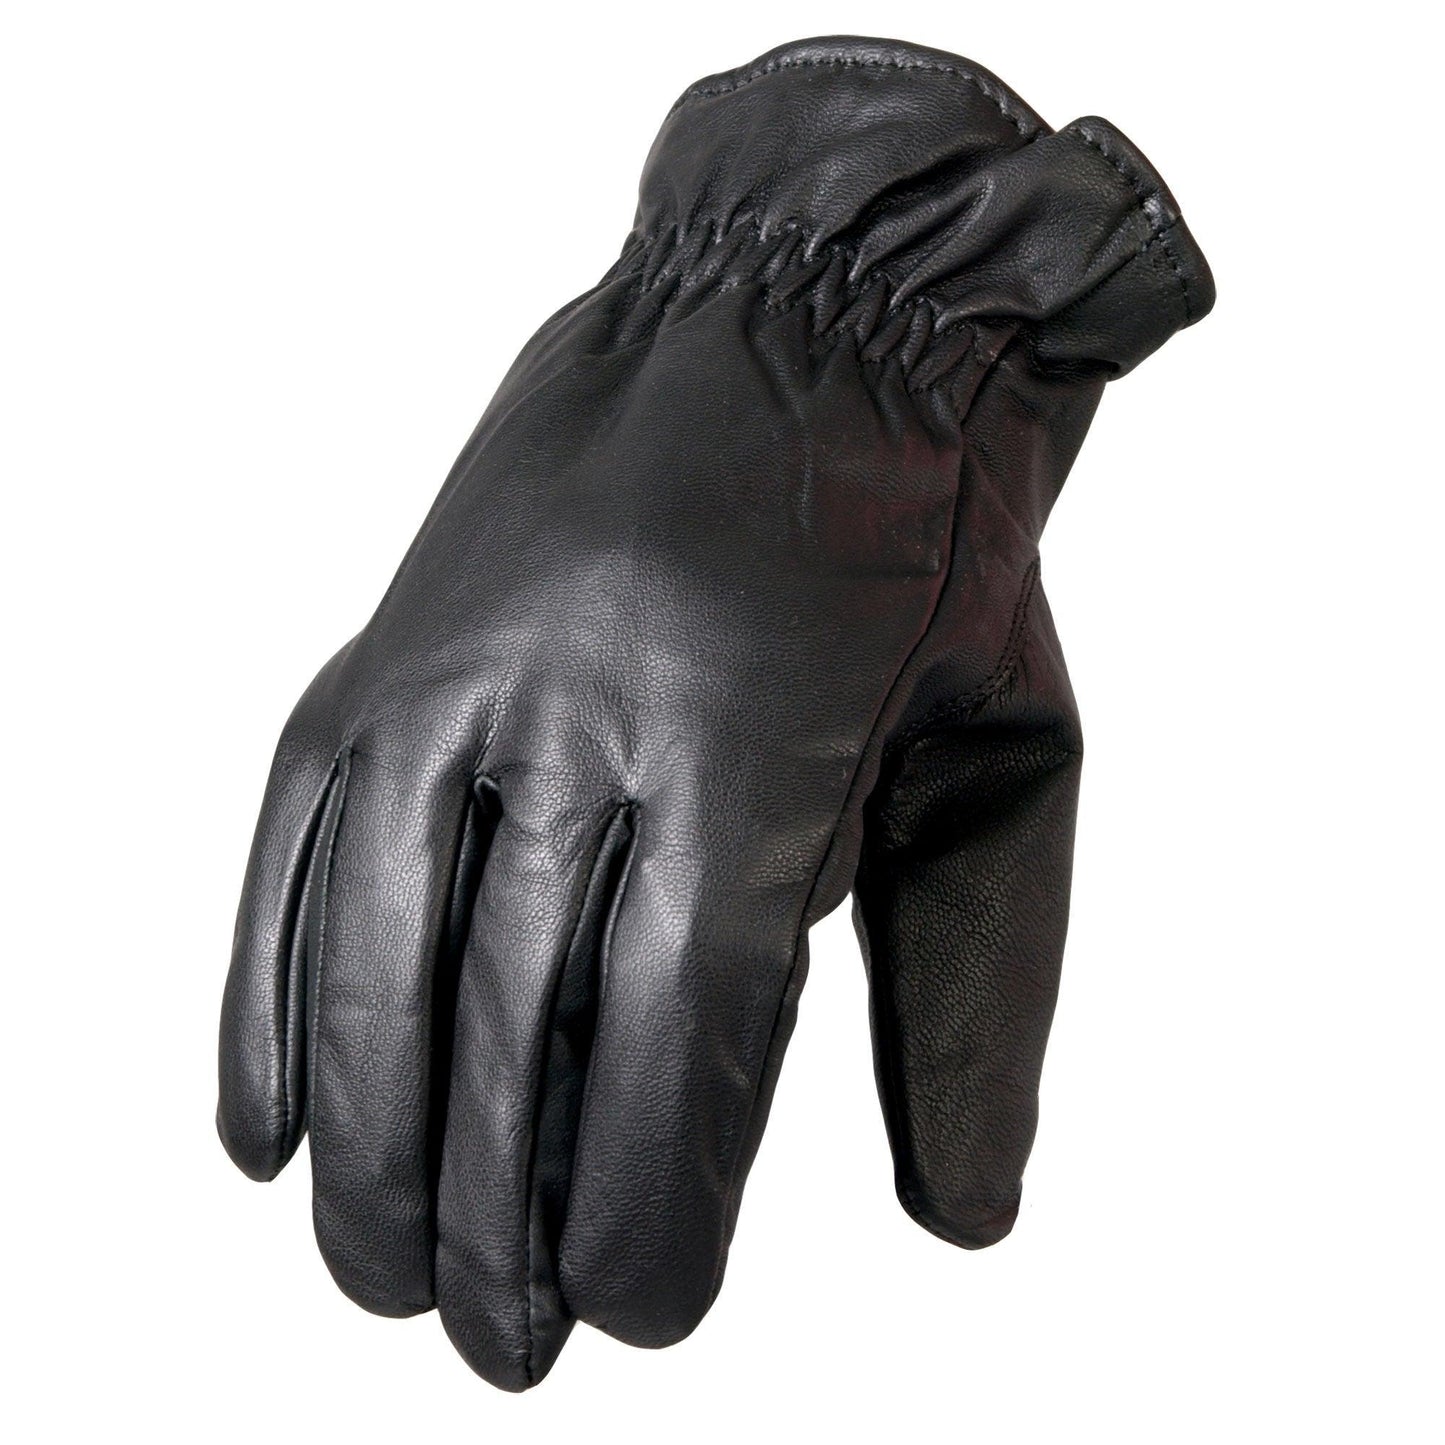 Waterproof Leather Riding Glove - Unisex - Military Republic